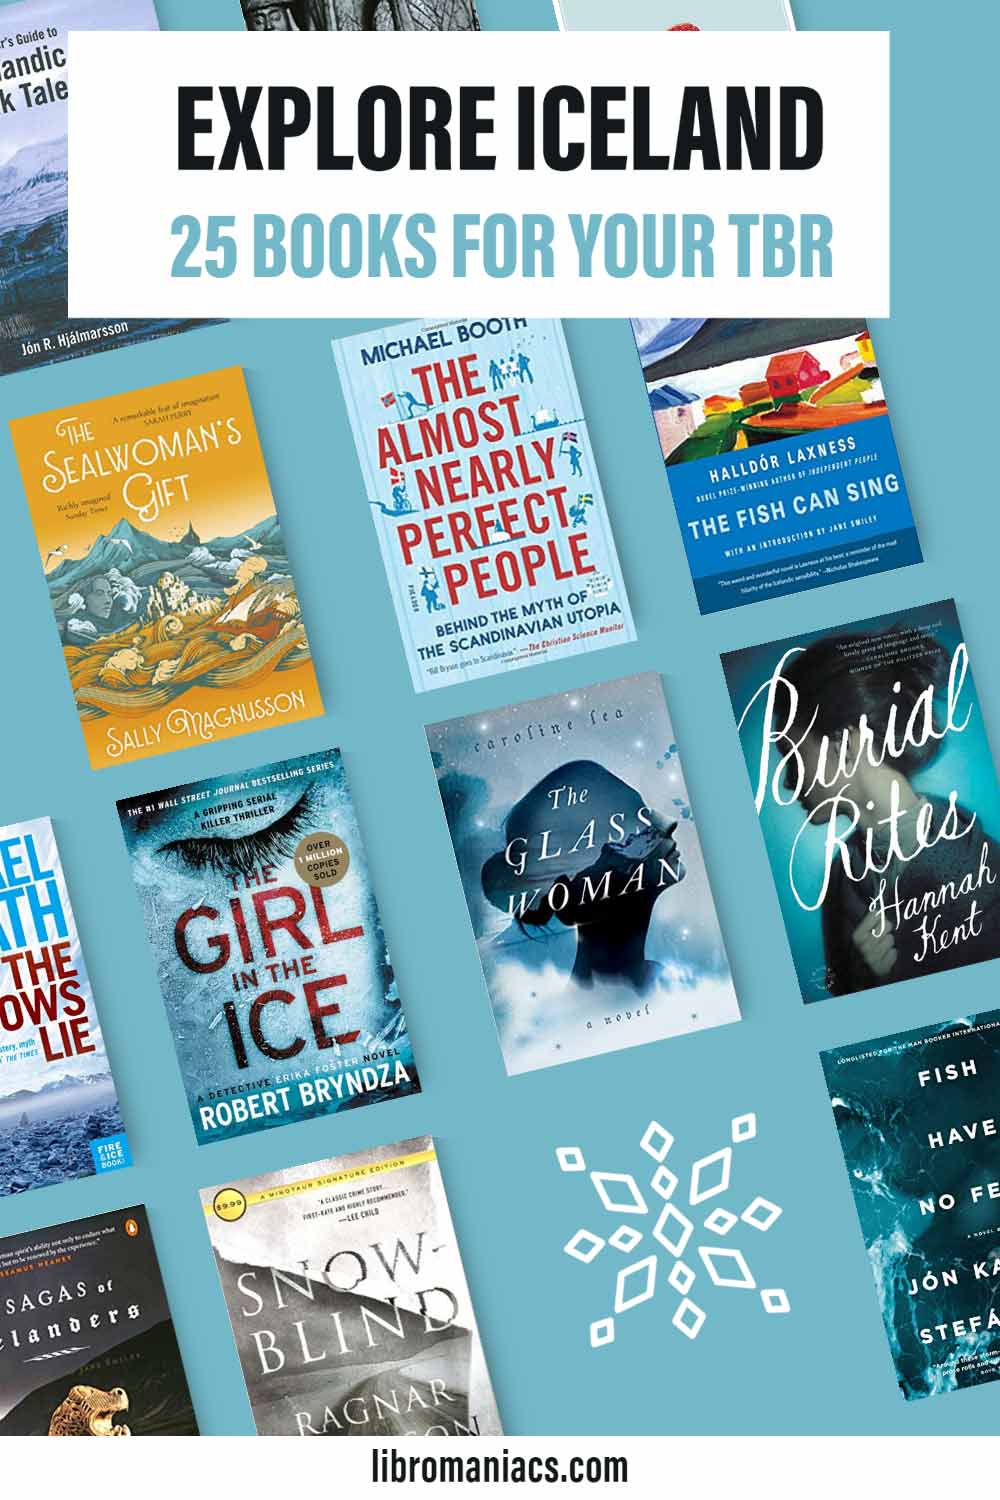 Explore Iceland 25 books for your TBR